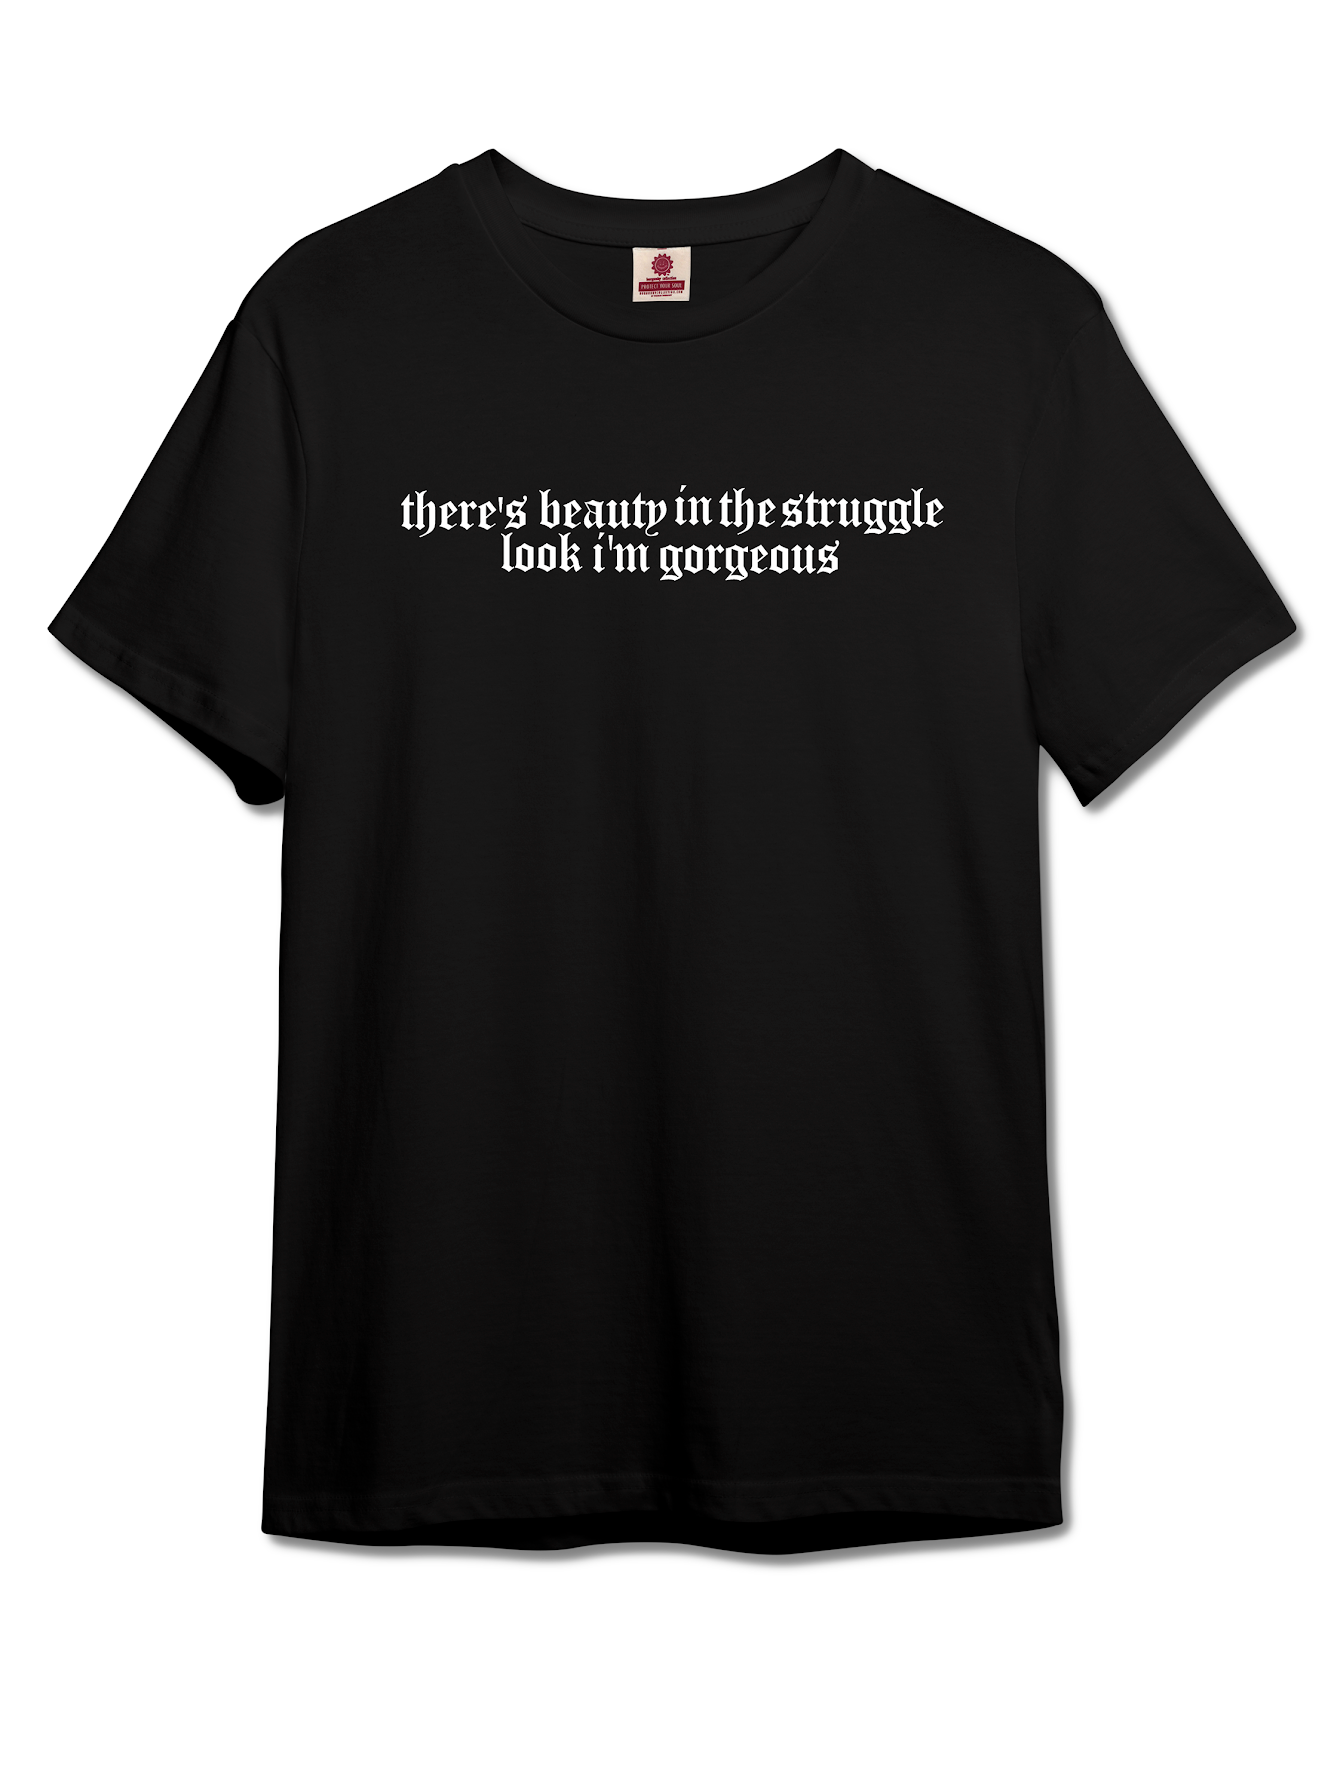 *“THERE’S BEAUTY IN THE STRUGGLE, LOOK I’M GORGEOUS (T-SHIRT)